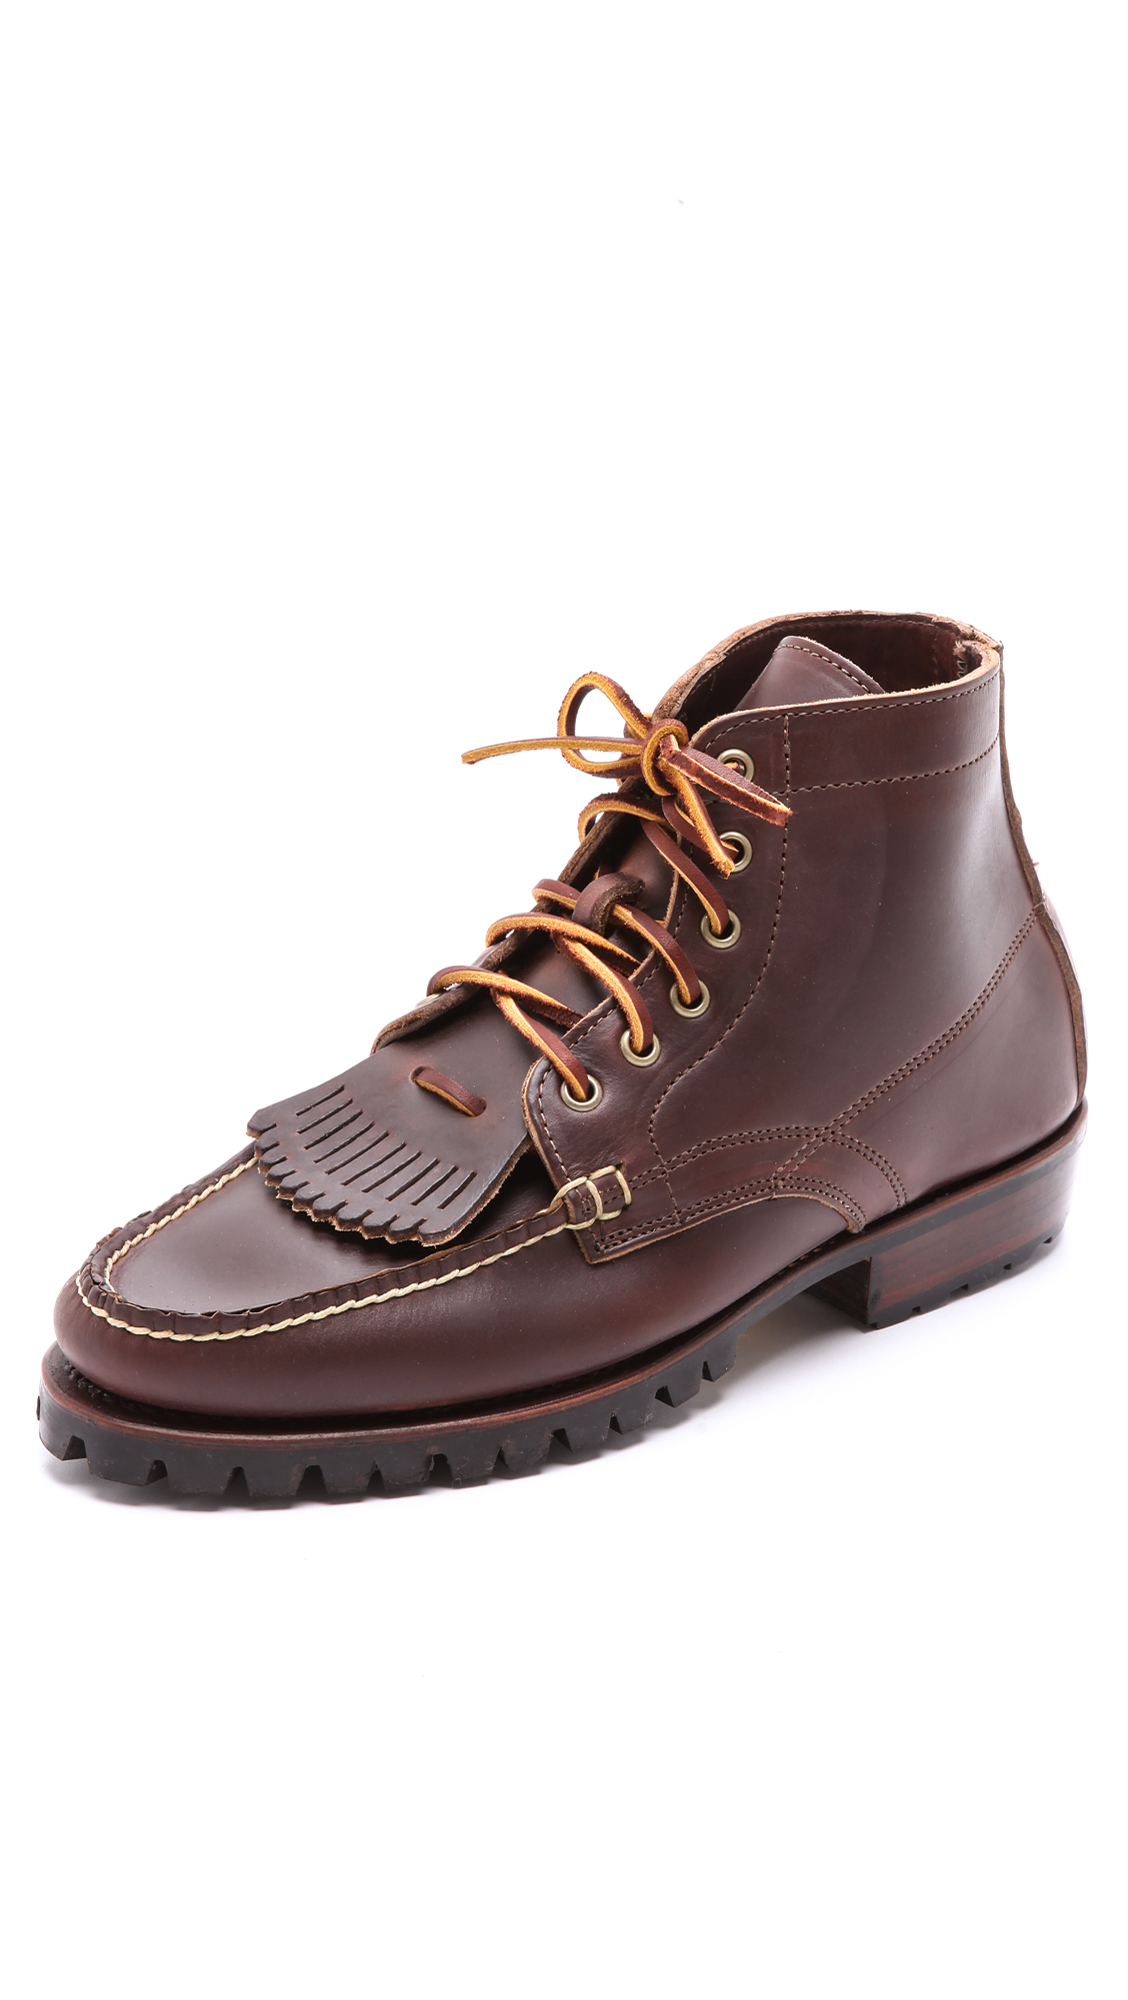 Eastland Belfast Usa Boots with 